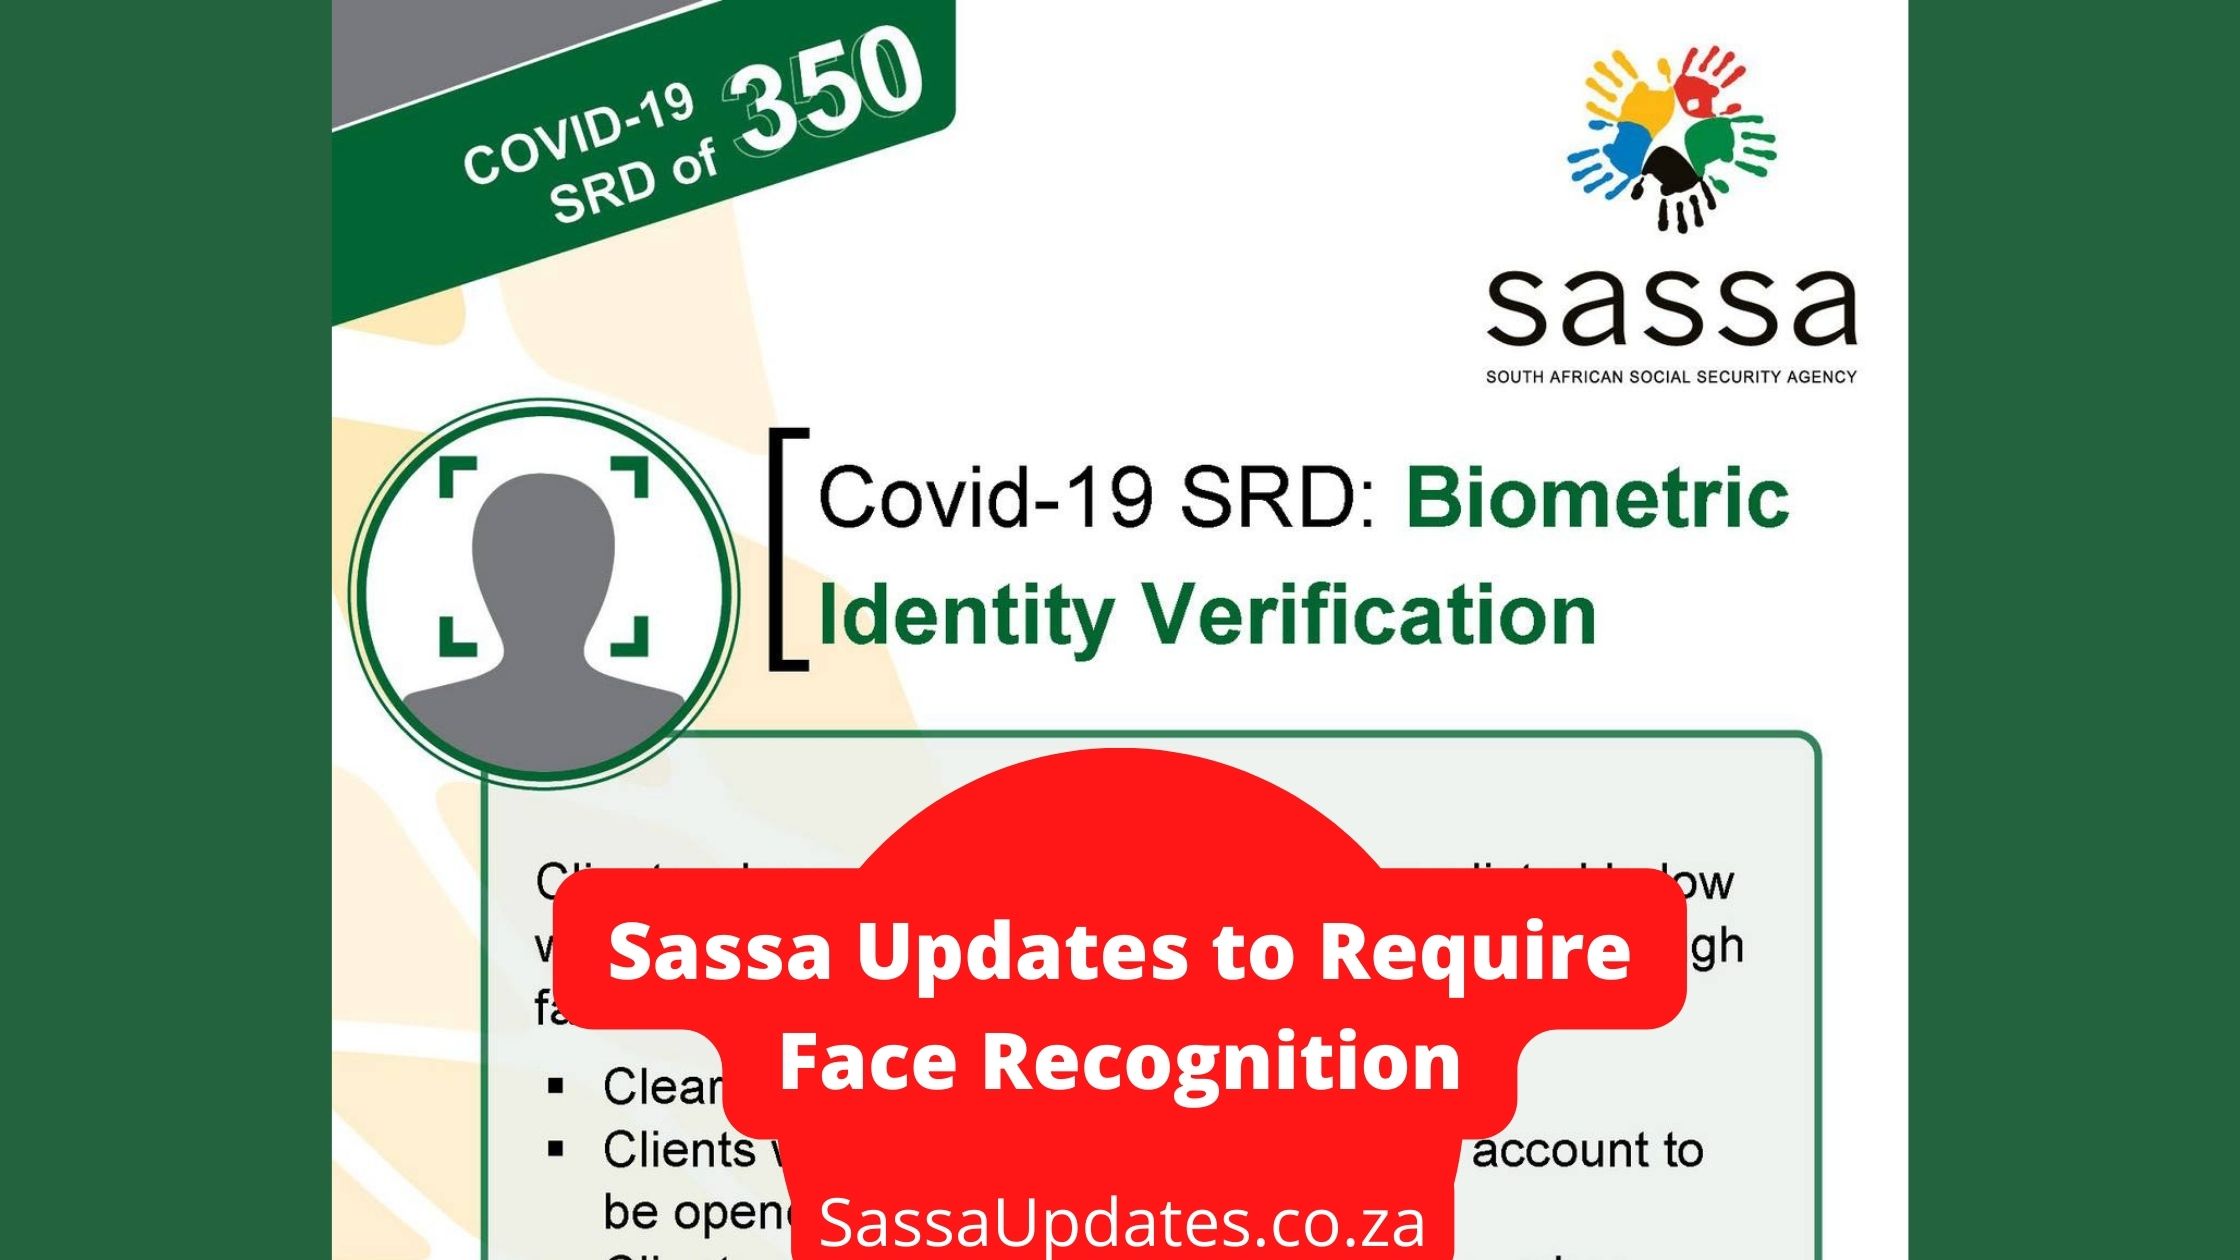 SRD Updates Require Face Recognition for verification